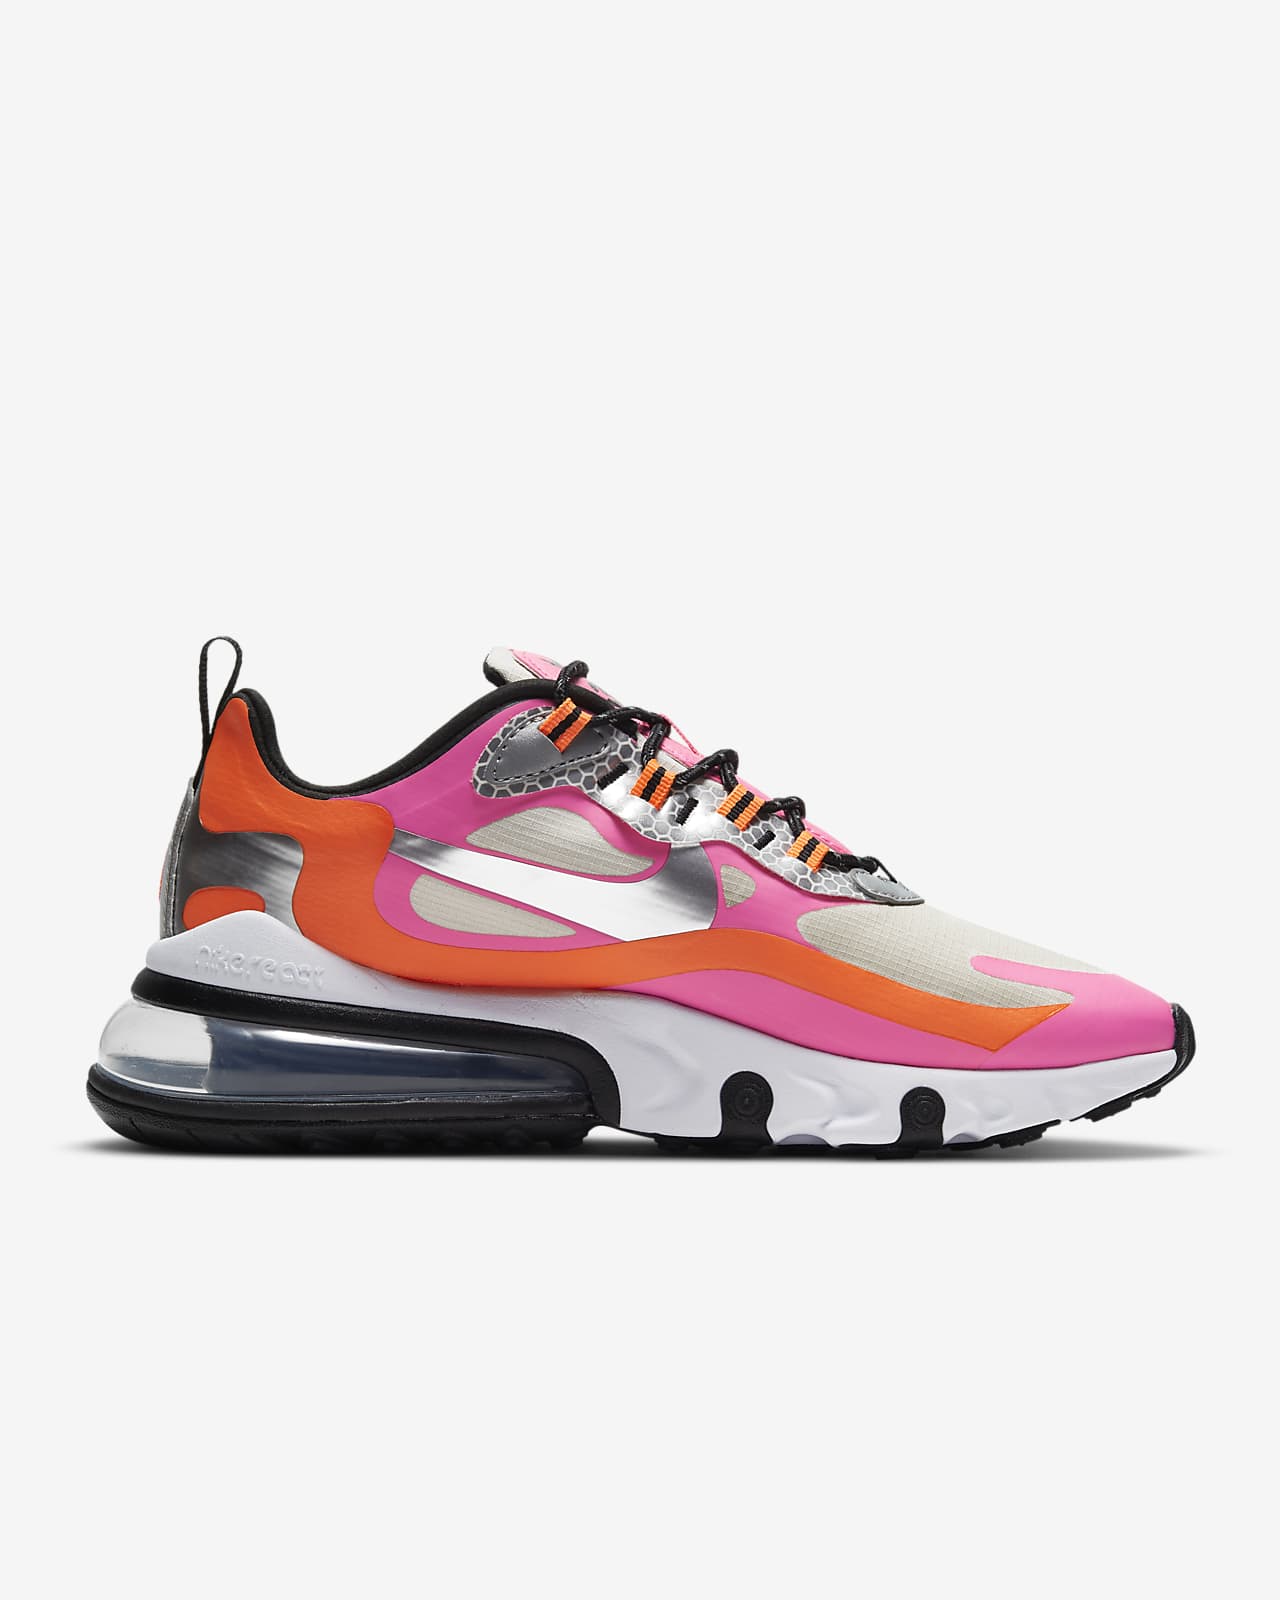 are nike air max 270 good for basketball